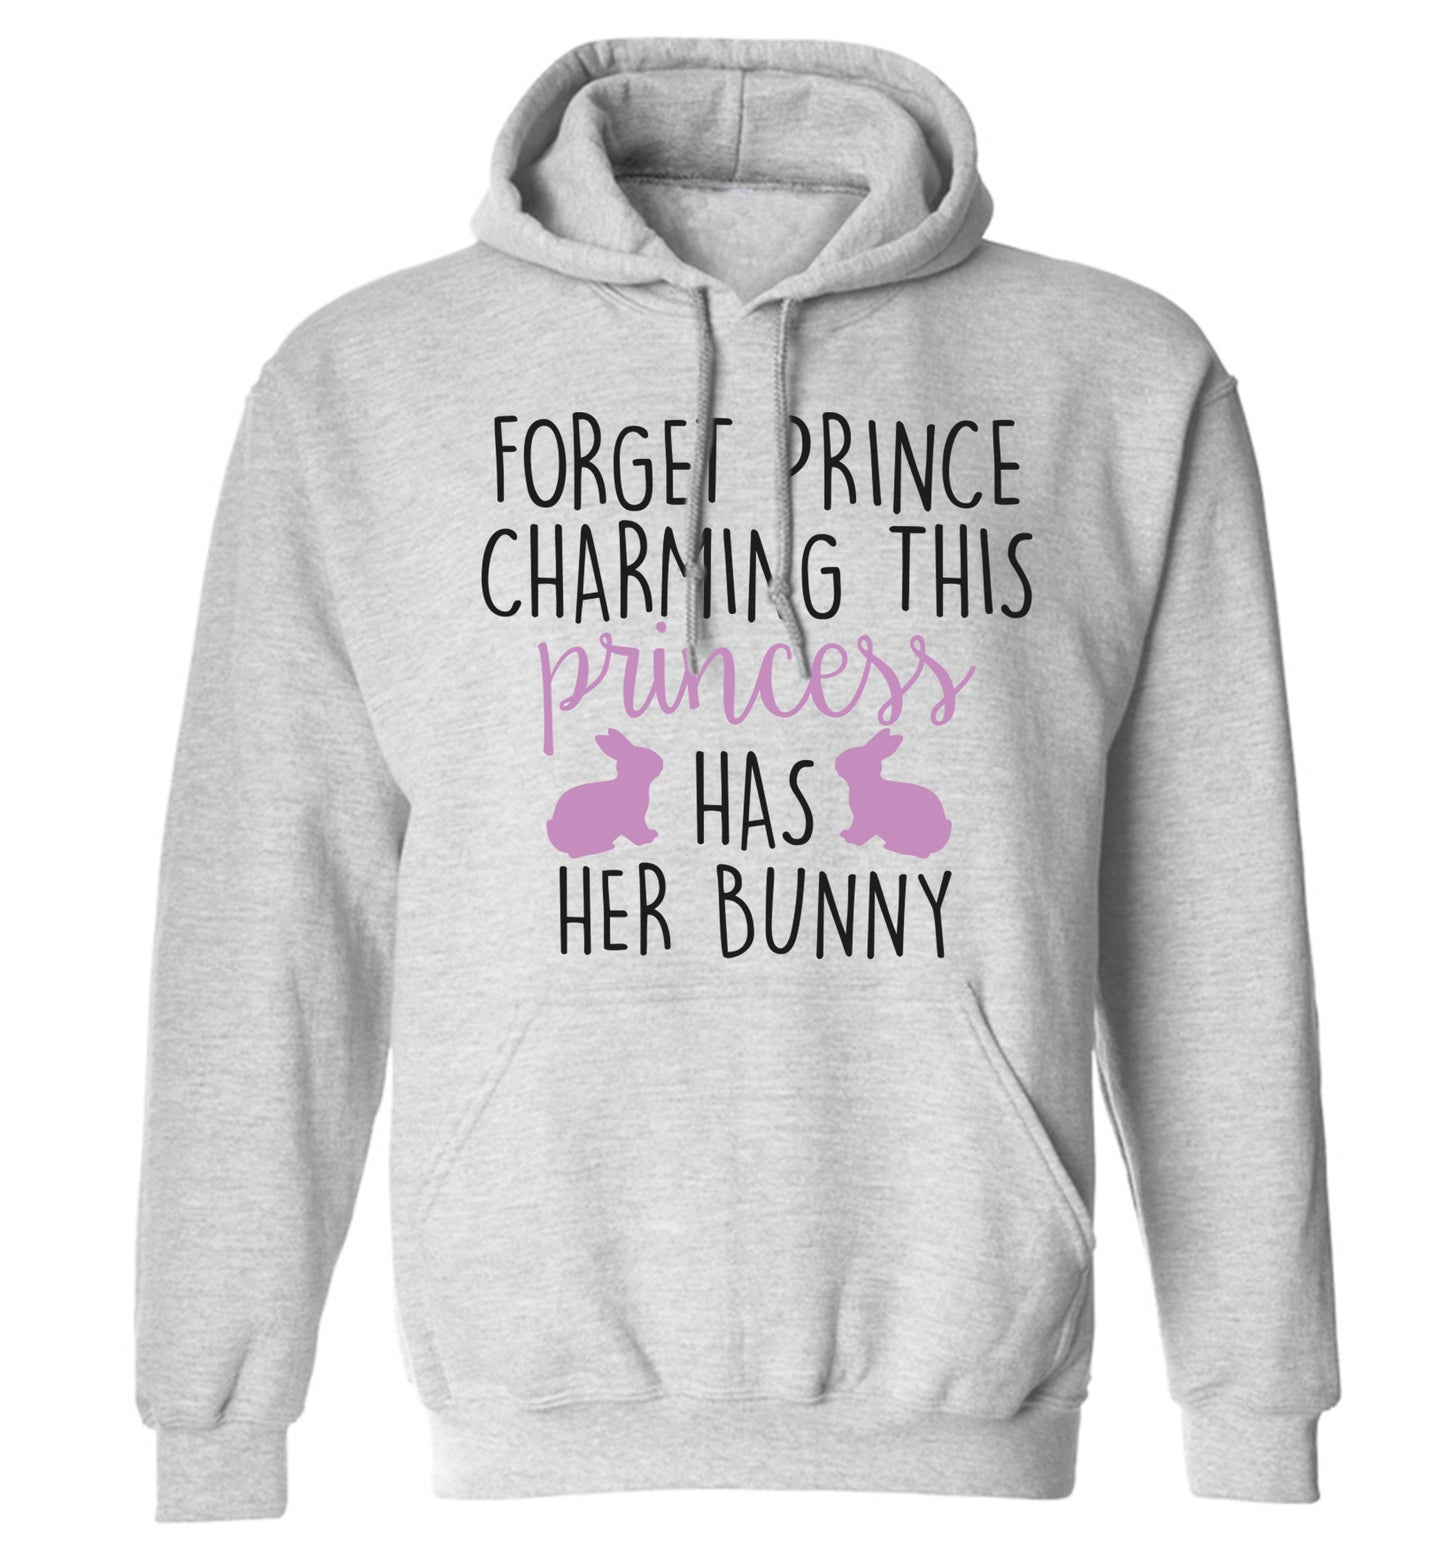 Forget prince charming this princess has her bunny adults unisex grey hoodie 2XL